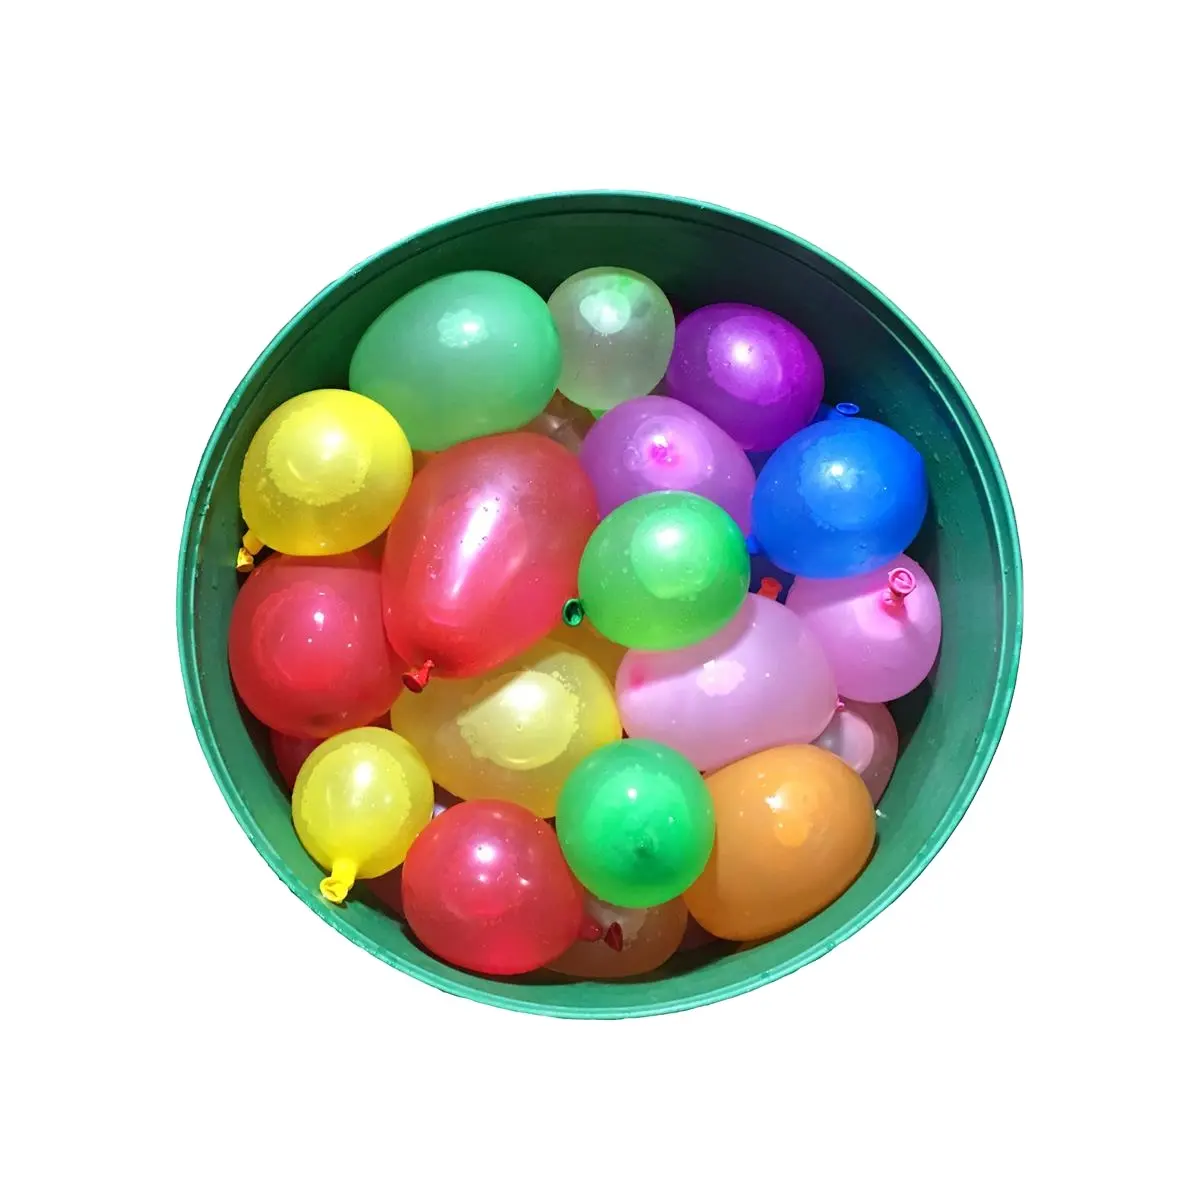 2021 Water Balloons for Kids Girls Boys Balloons Set Party Games Quick Fill 444 Balloons for Swimming Pool Outdoor Summer Funs